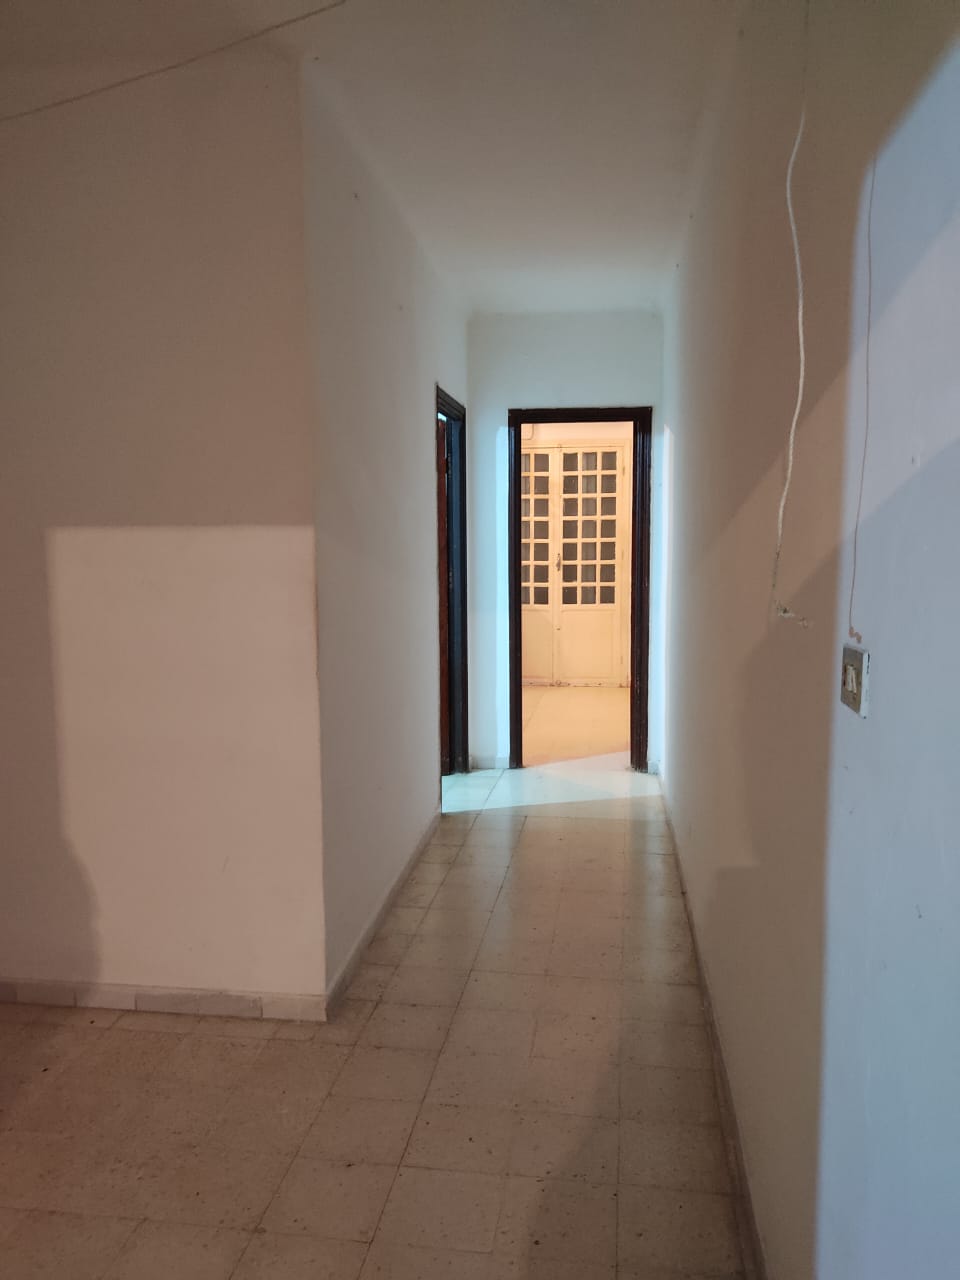 Soliman Soliman Location Appart. 2 pices Appartement meubl a soliman plage